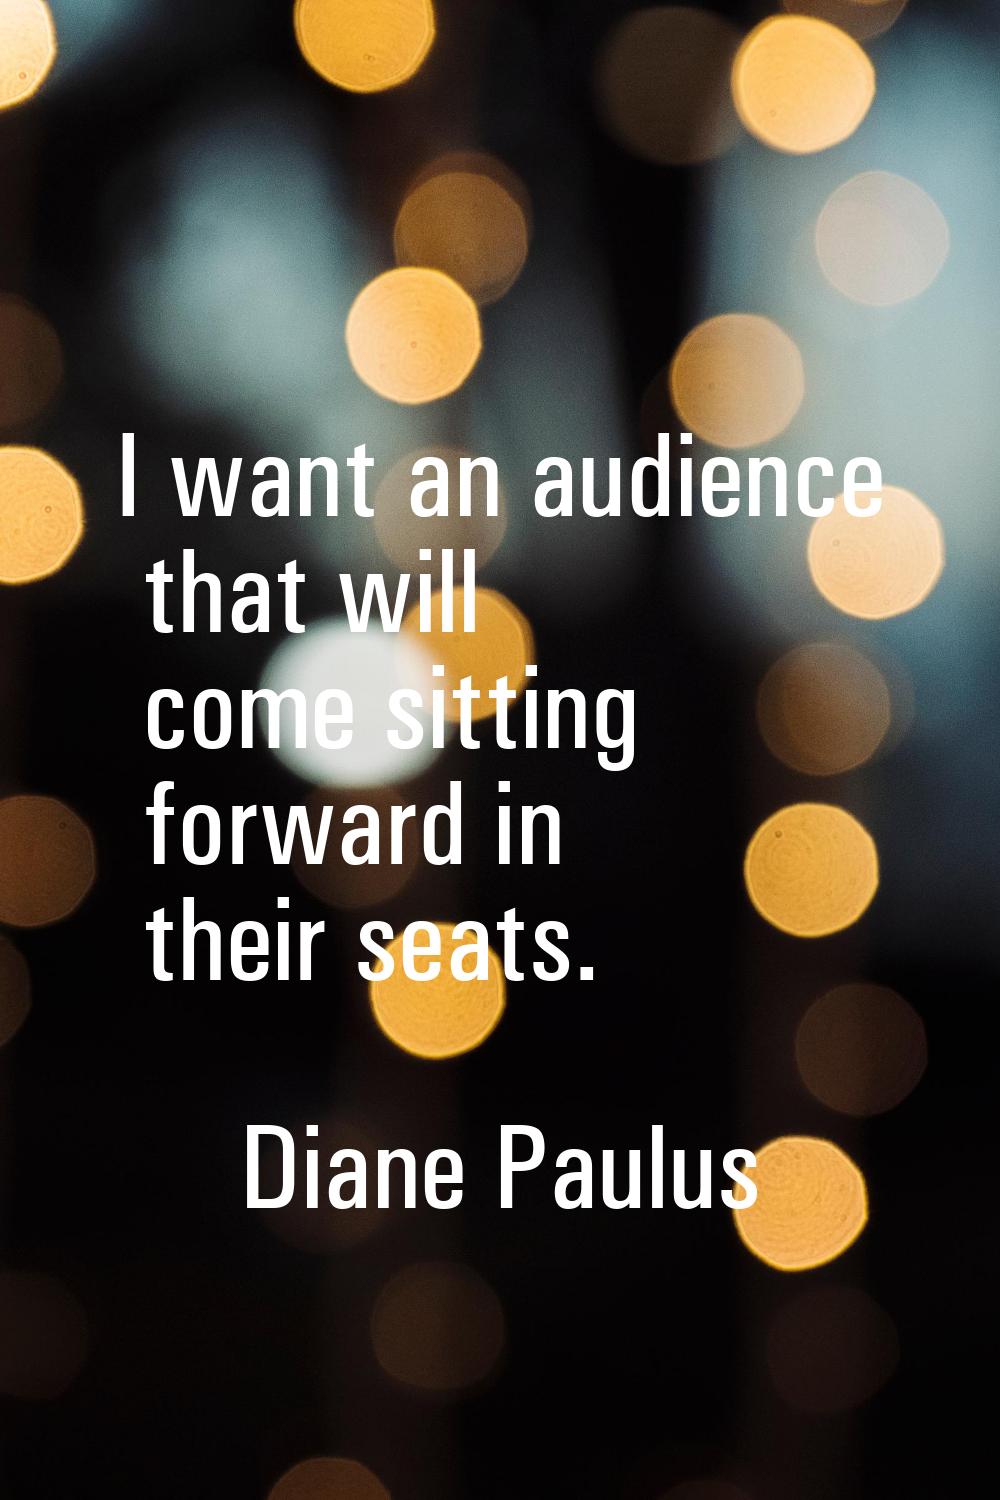 I want an audience that will come sitting forward in their seats.